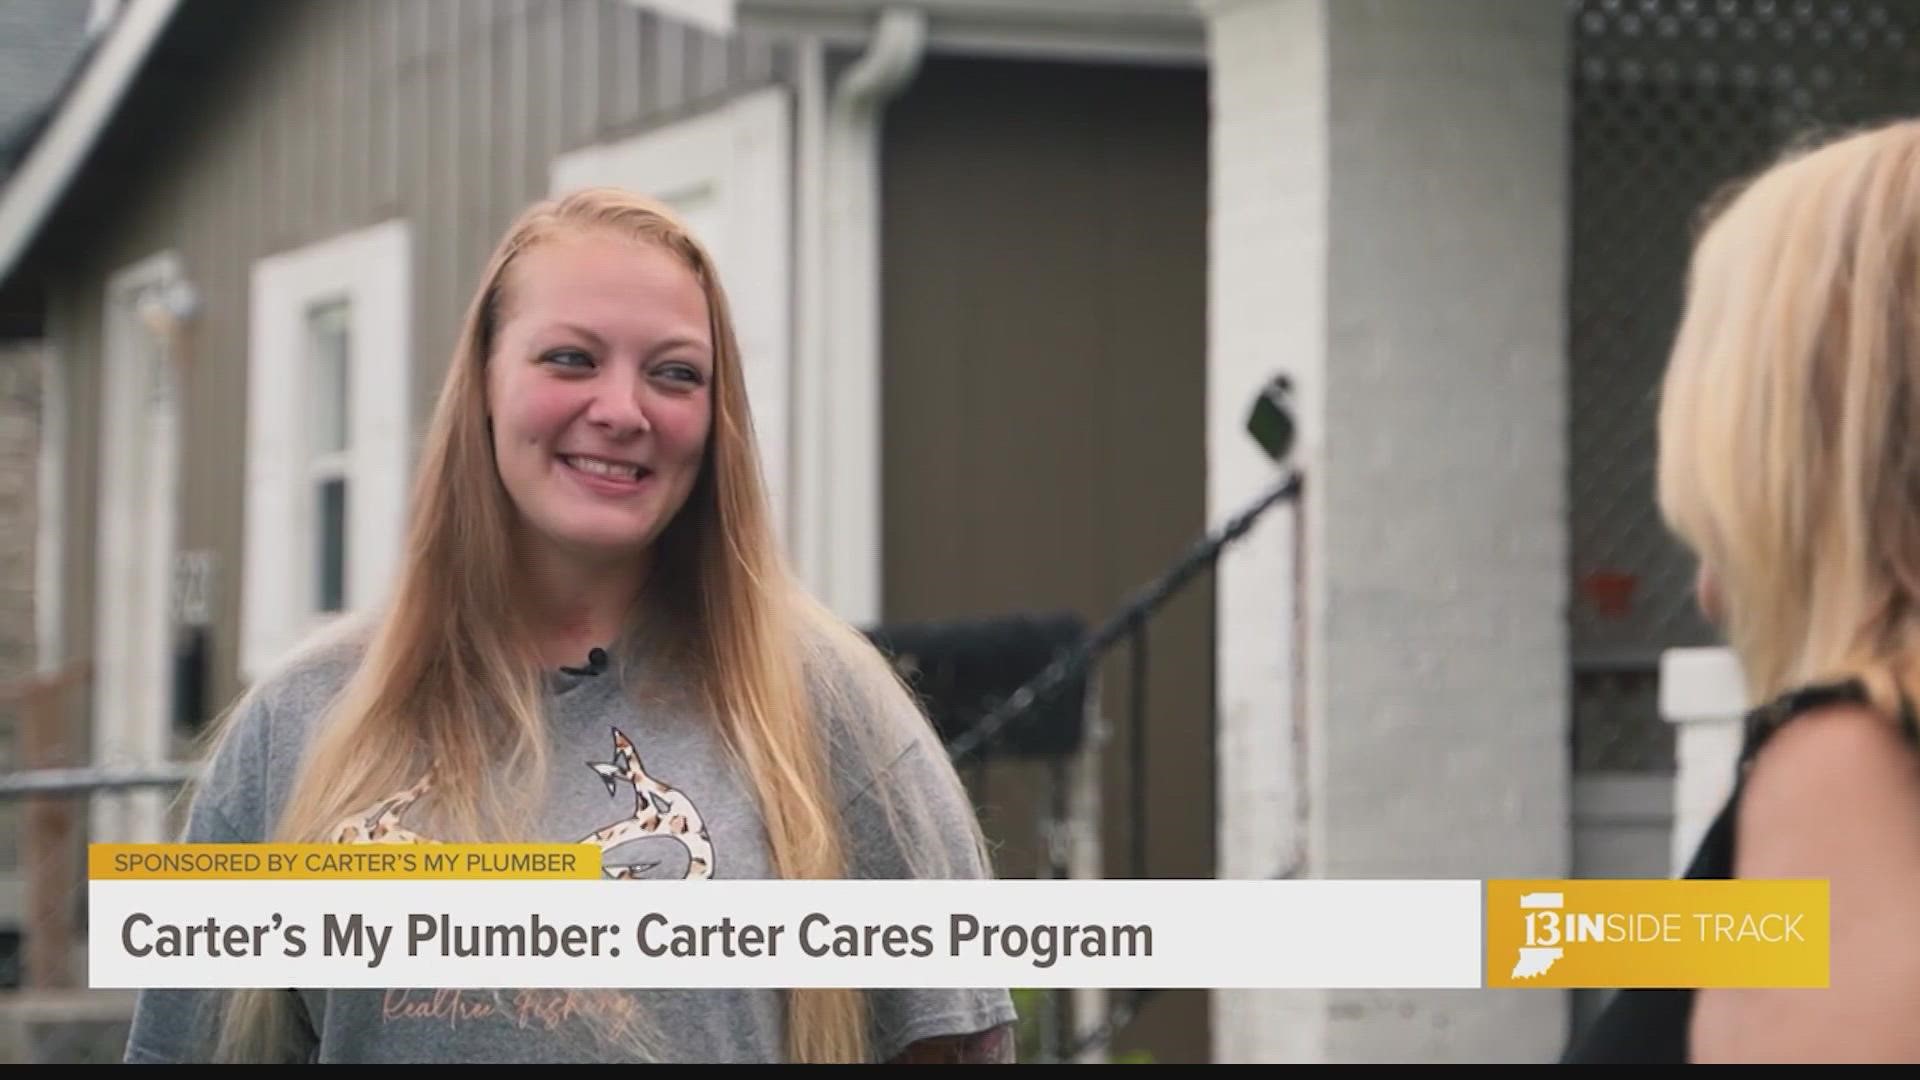 Carter's My Plumber donates a free water heater once a month to someone in need.